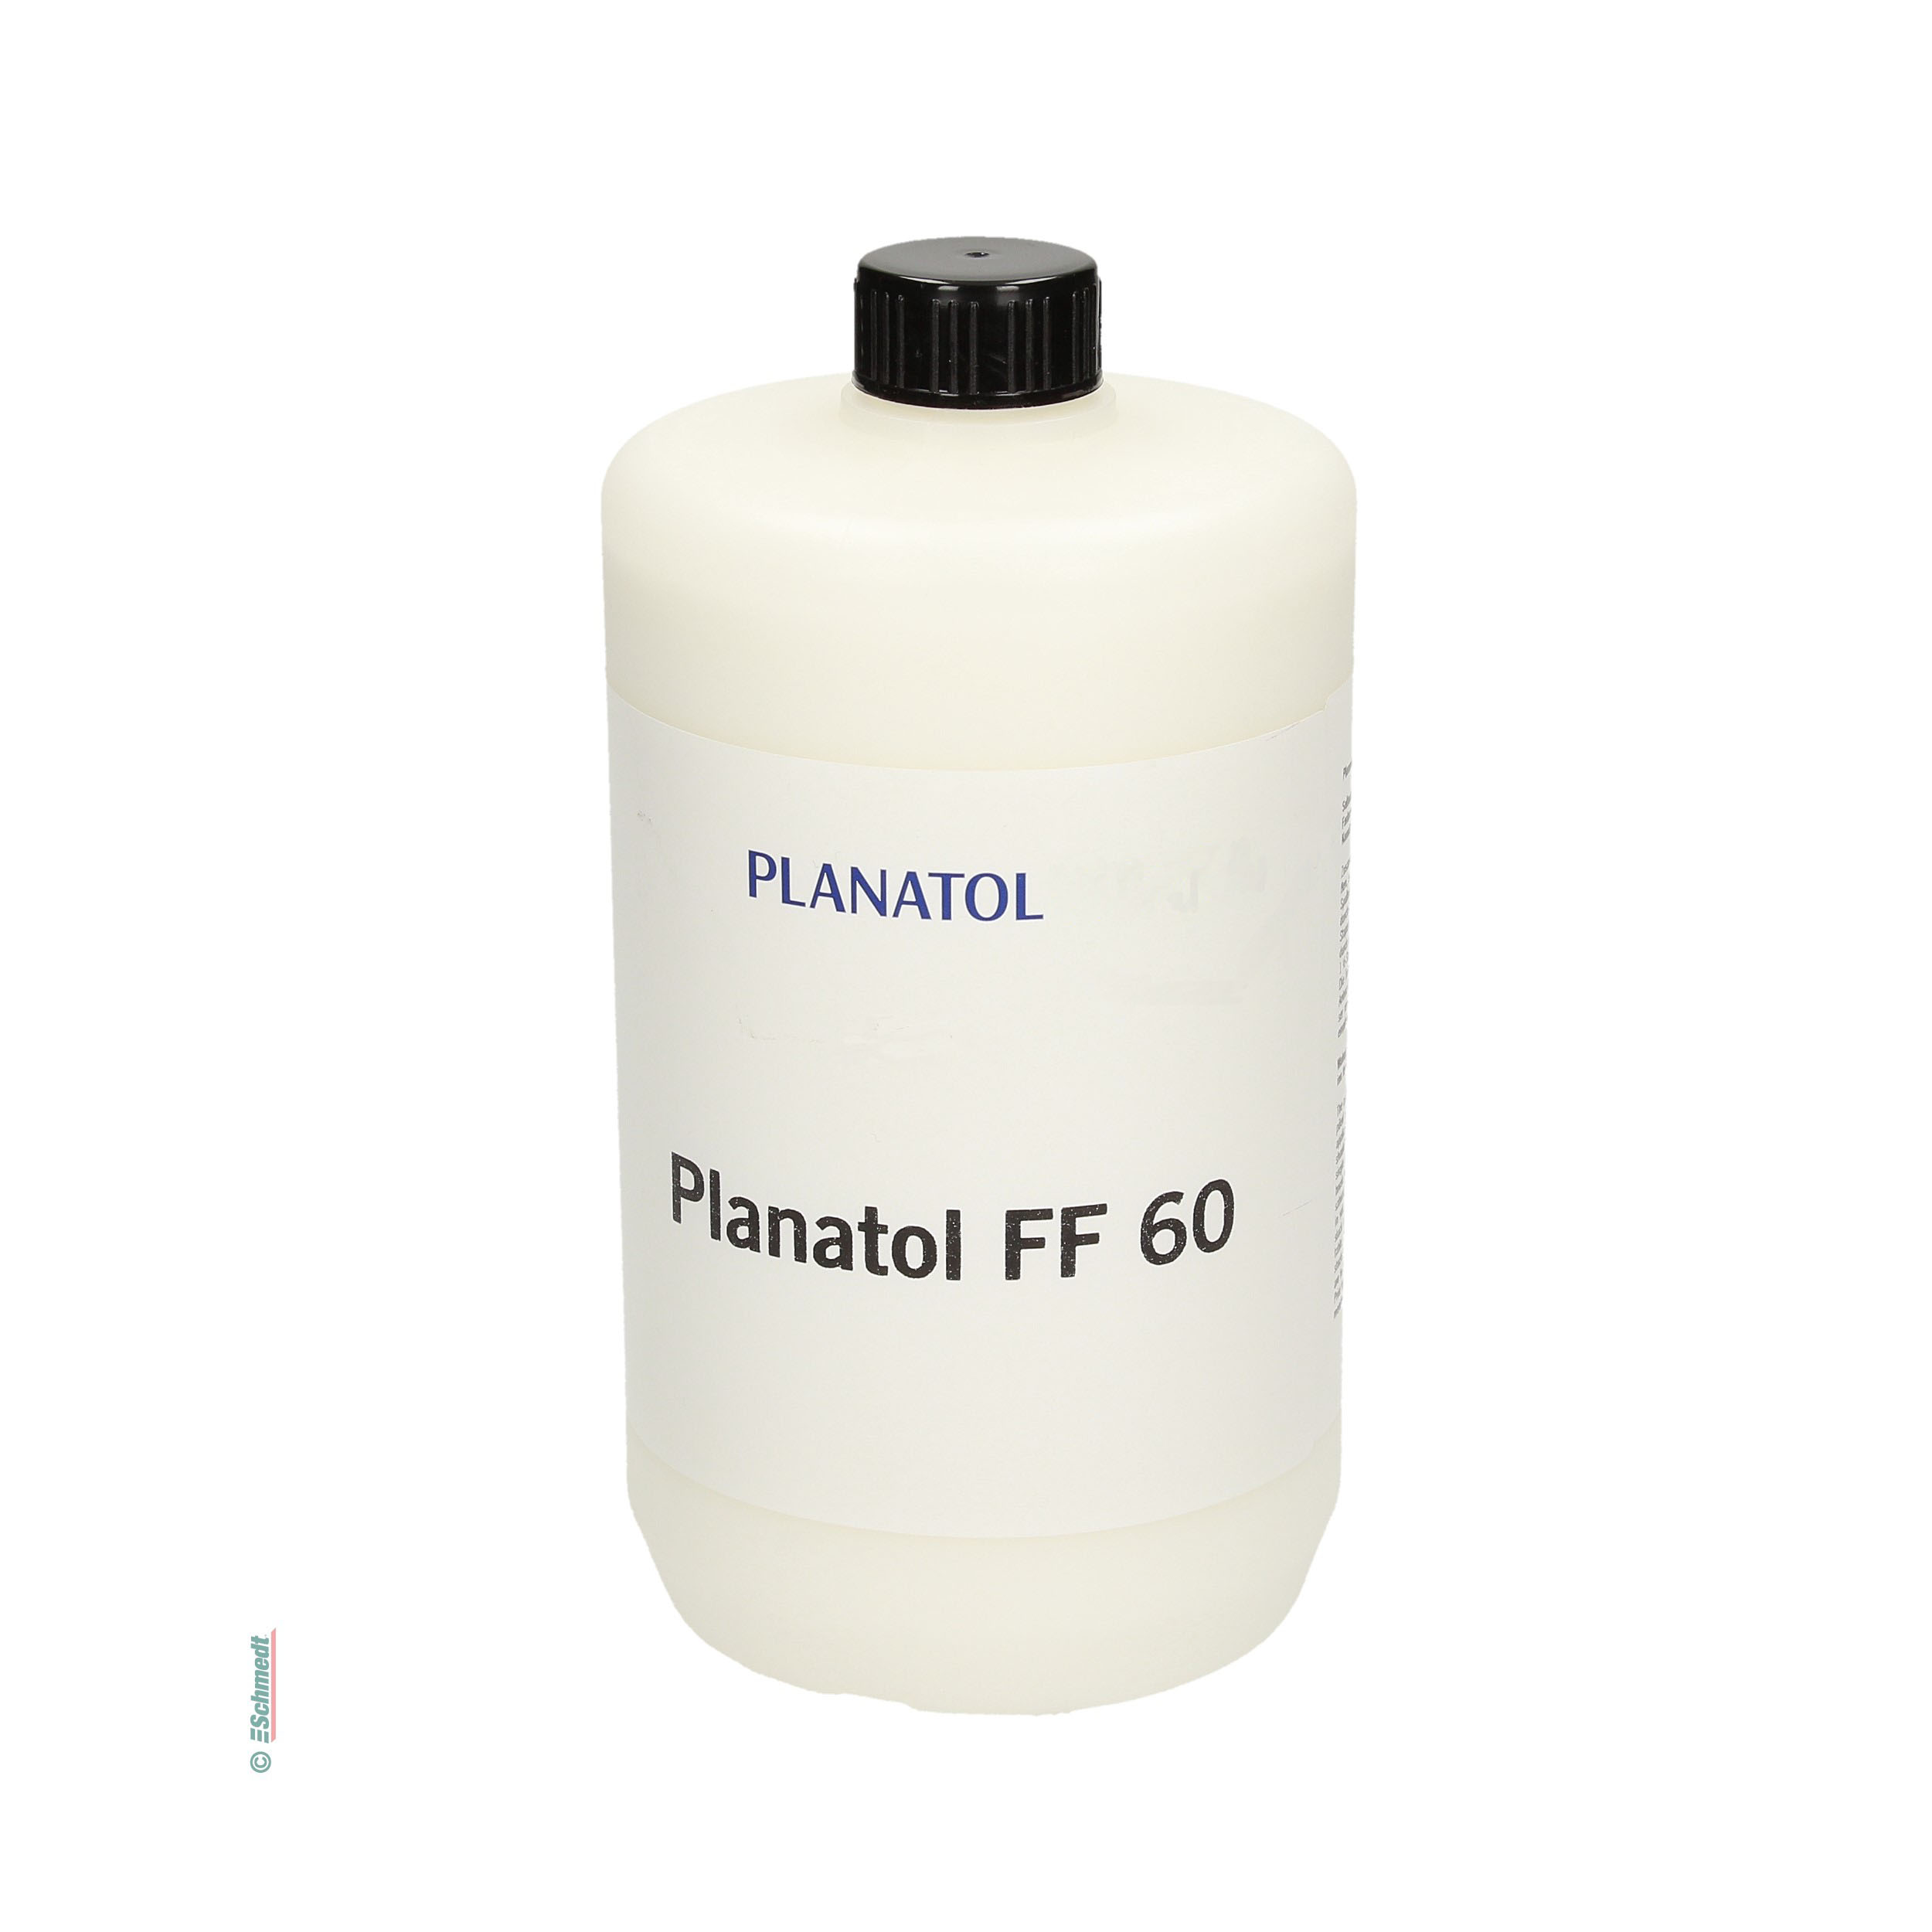 Planatol FF 60 - Dispersion glue for head-gluing sets of forms - for self-separating head-gluing sets of forms of chemically reacting charco...